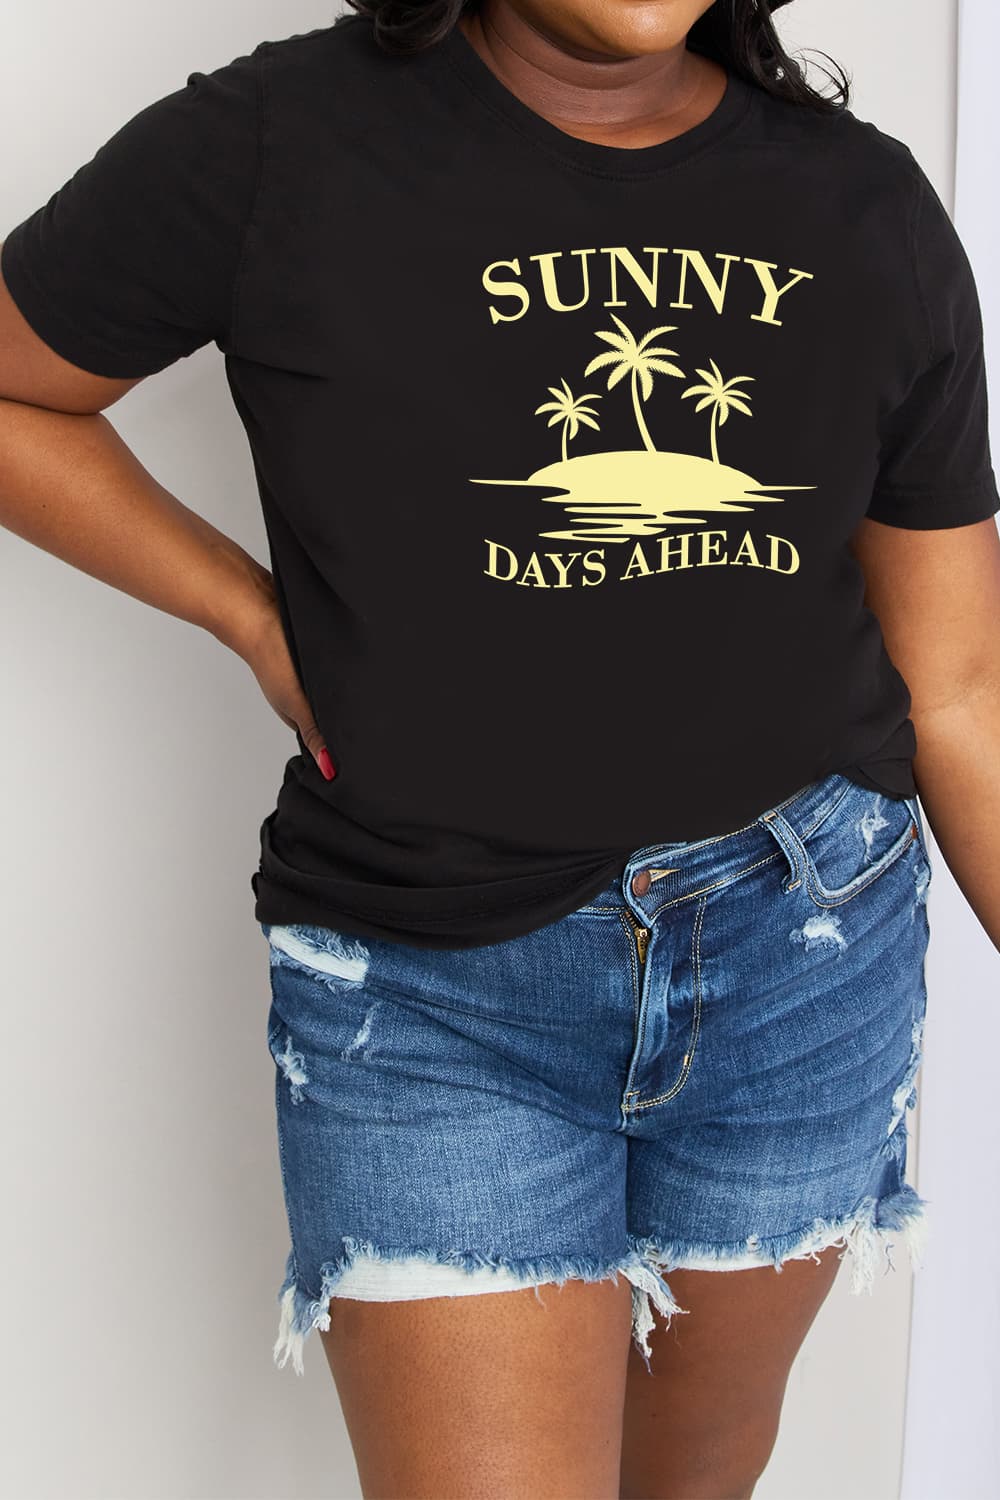 Simply Love Full Size SUNNY DAYS AHEAD Graphic Cotton Tee